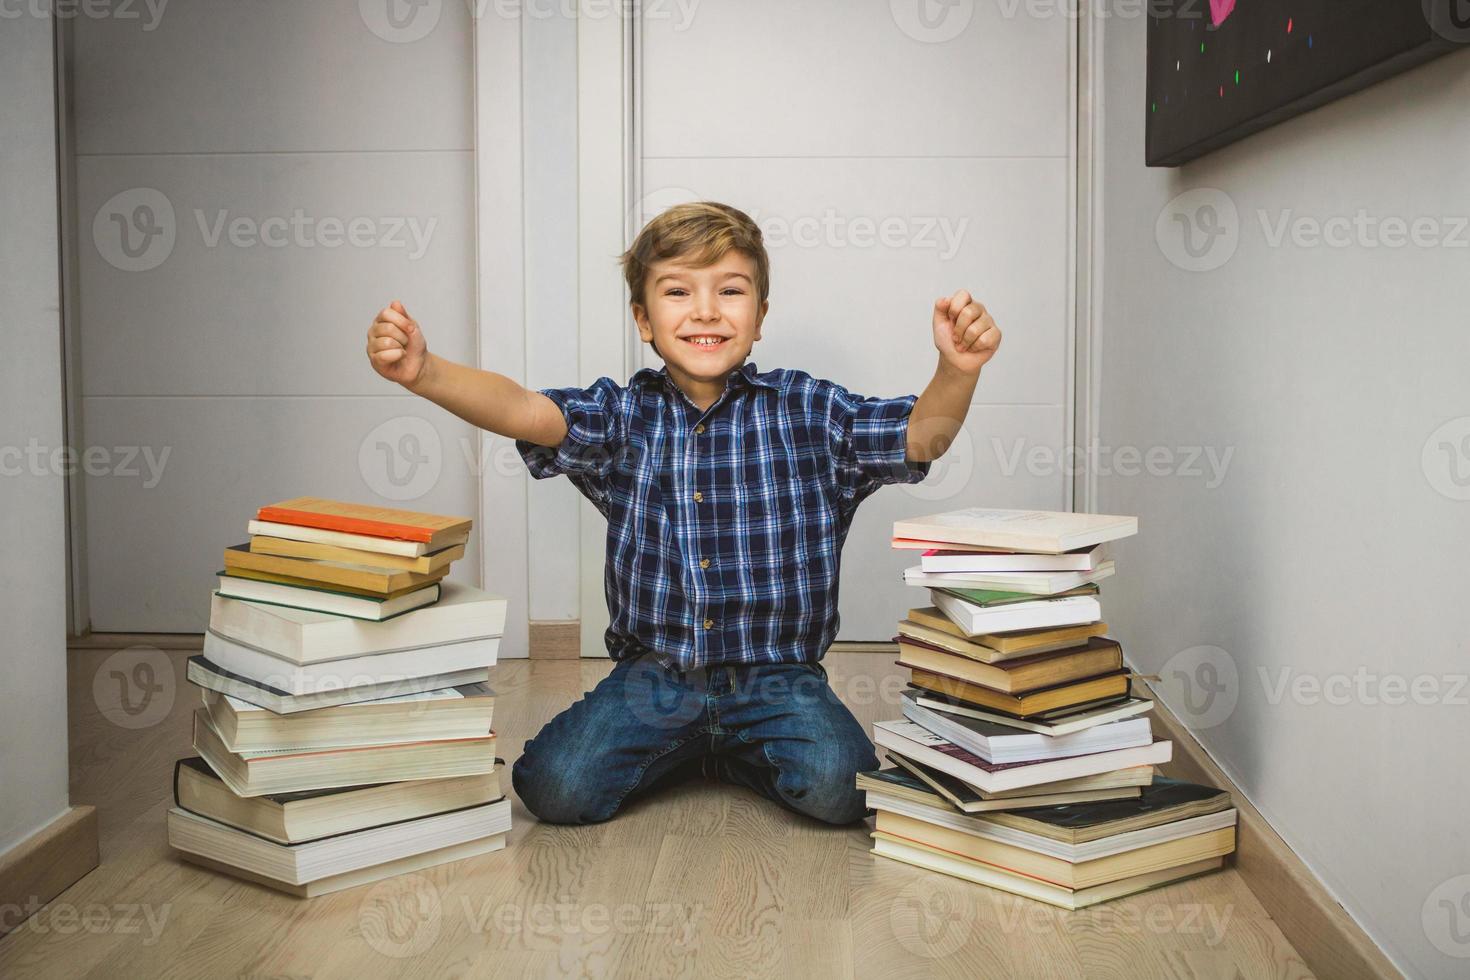 Excited kid with hands raised with books around him. photo